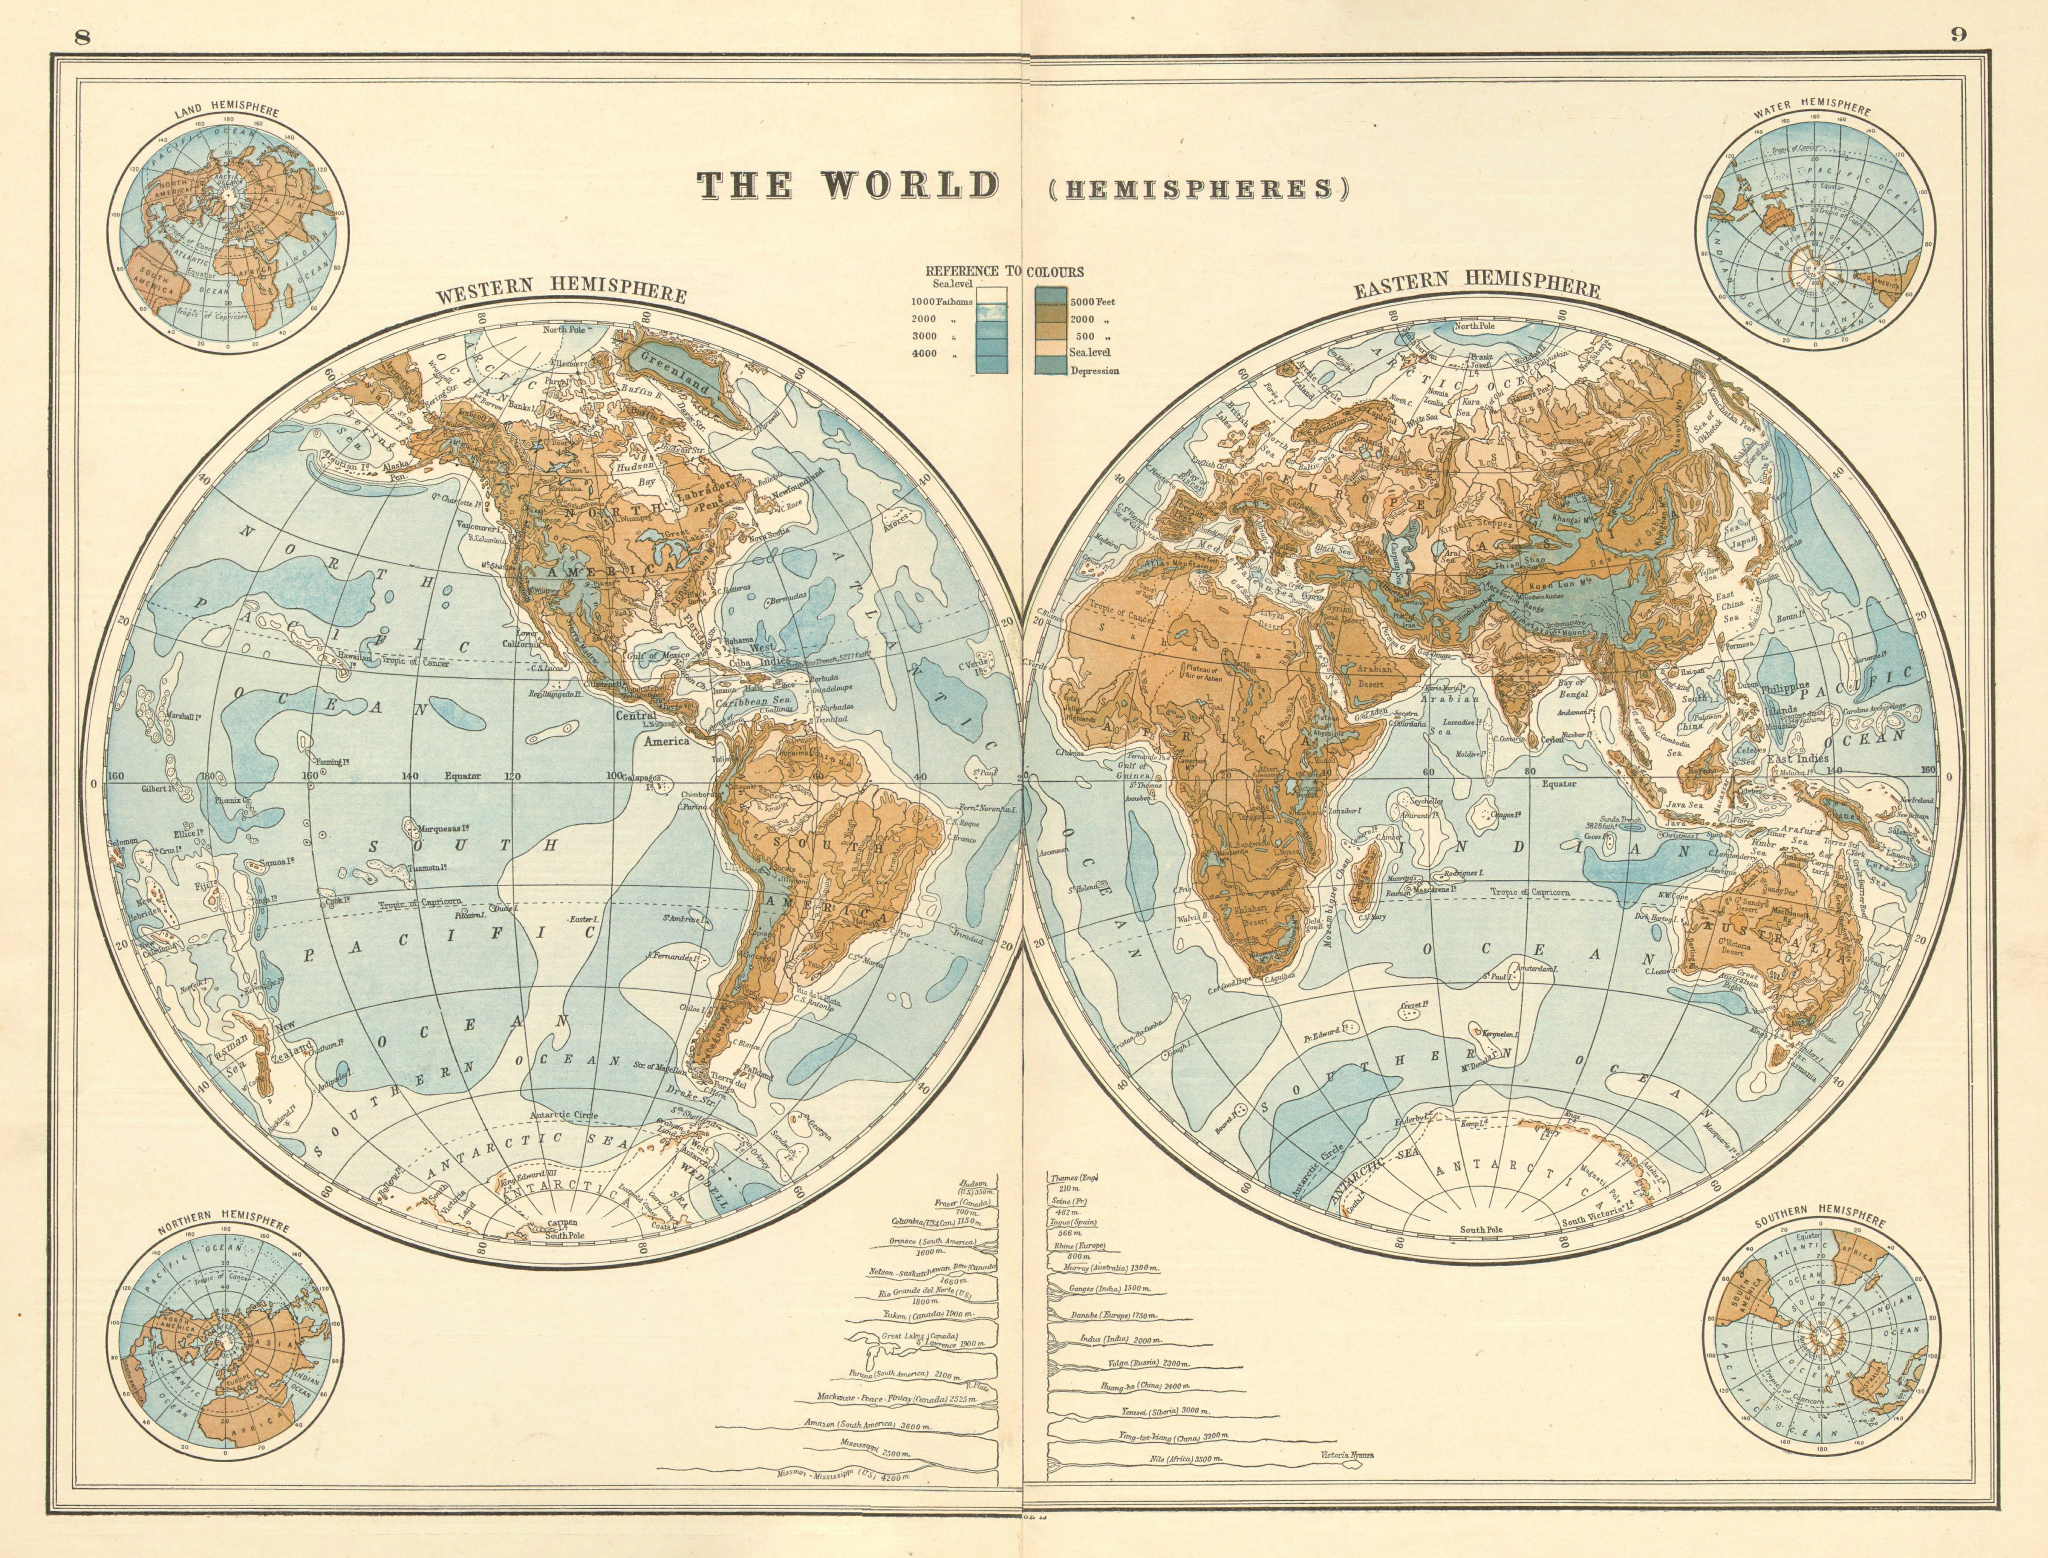 Associate Product WORLD IN HEMISPHERES. Relief. NSEW. Land & Water. River lengths 1920 old map